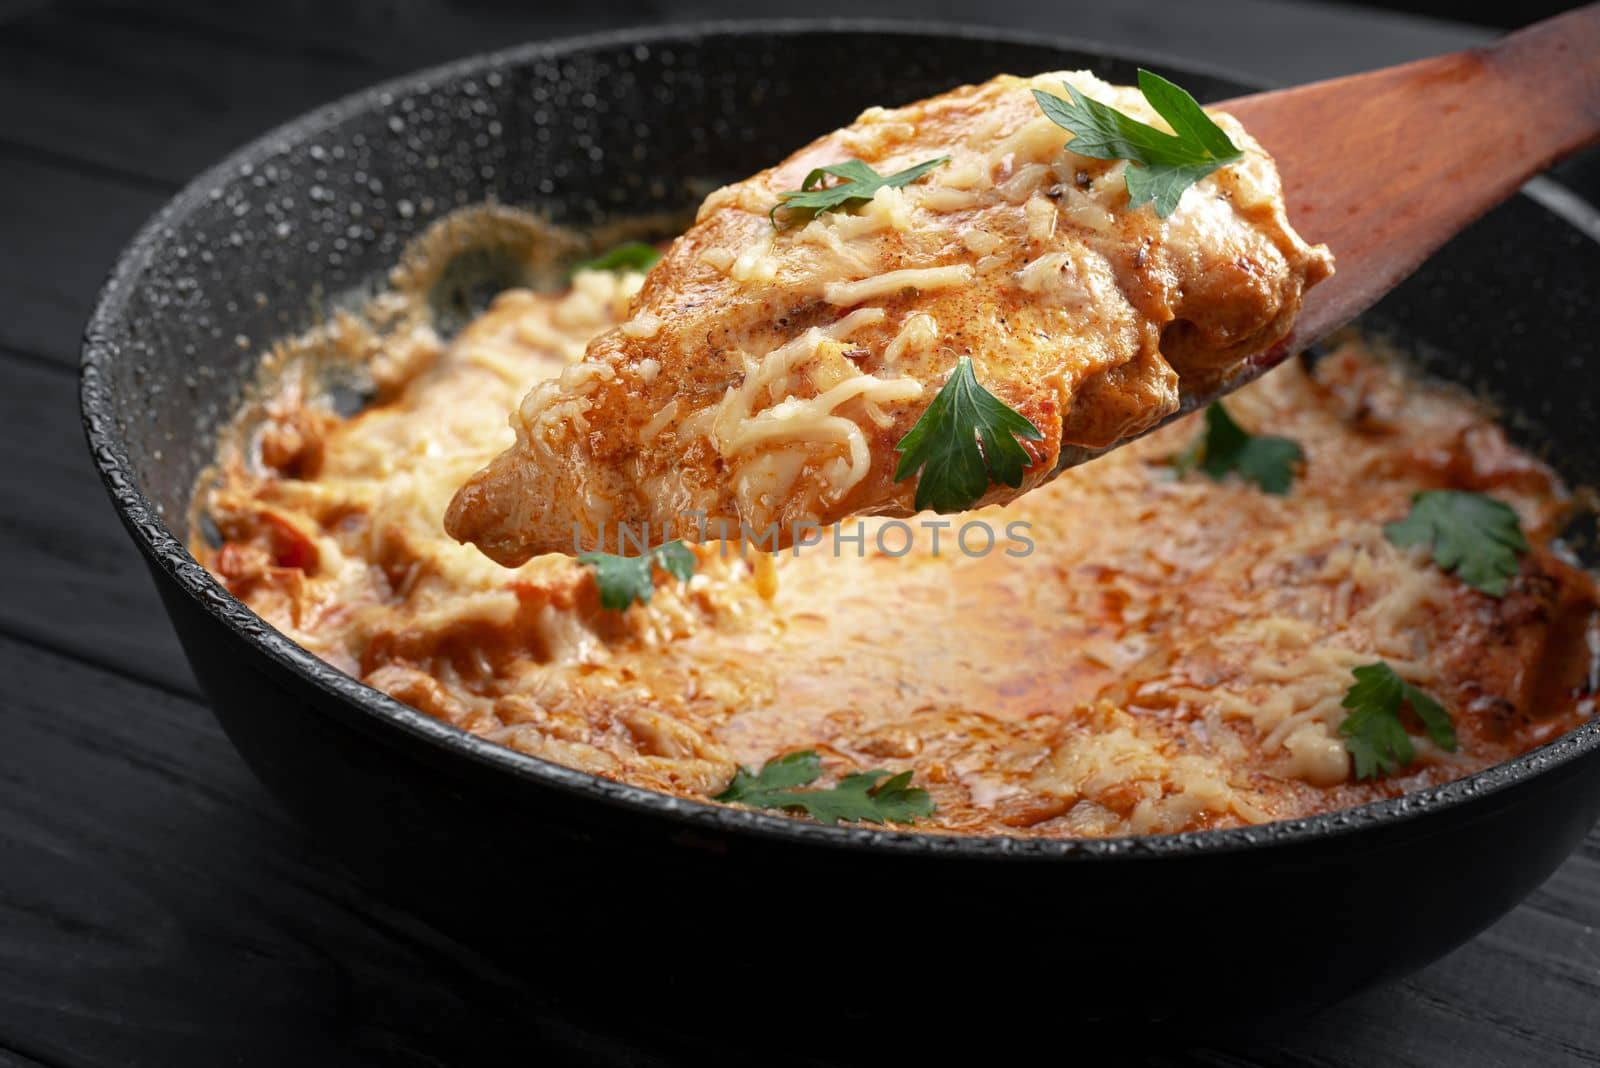 Chicken tikka masala. Black background. Place for text. Chicken in oil, a traditional Indian dish. Top view. Chicken tikka masala. Indian Cuisine by gulyaevstudio